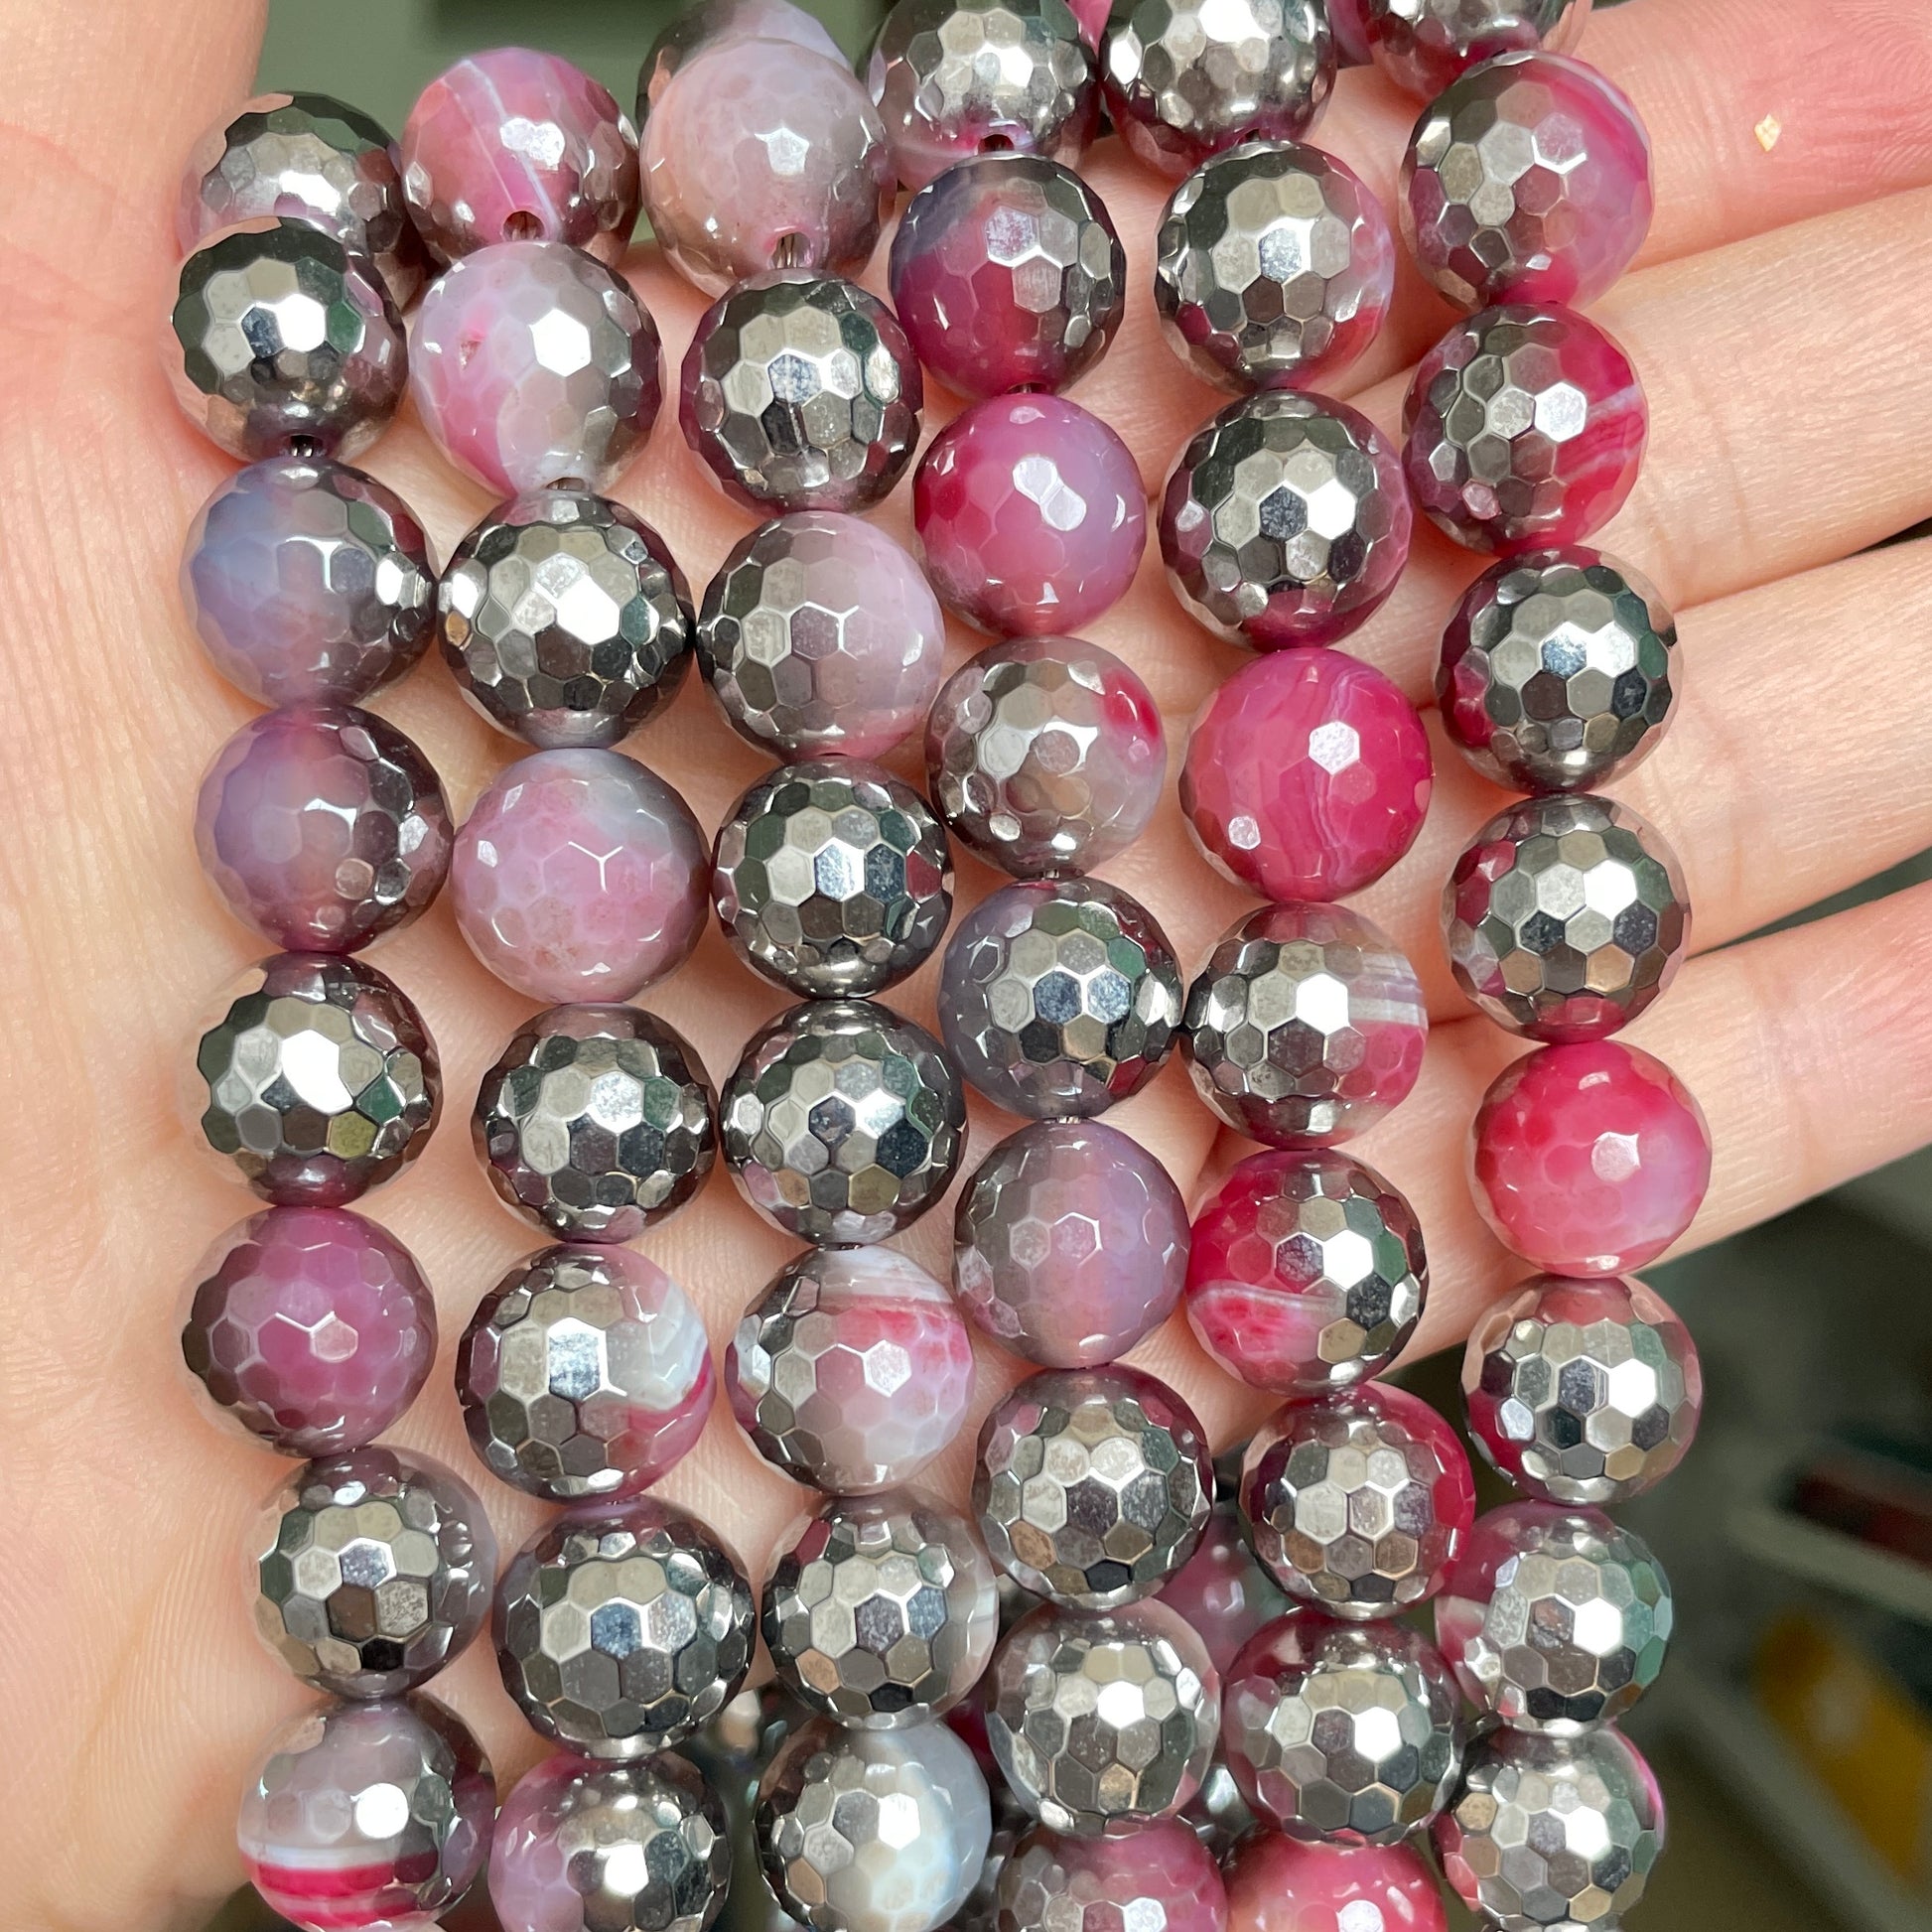 12mm Half Silver Electroplated Pink Banded Agate Stone Faceted Beads--Grade A Premium Quality Electroplated Beads 12mm Stone Beads New Beads Arrivals Premium Quality Agate Beads Charms Beads Beyond